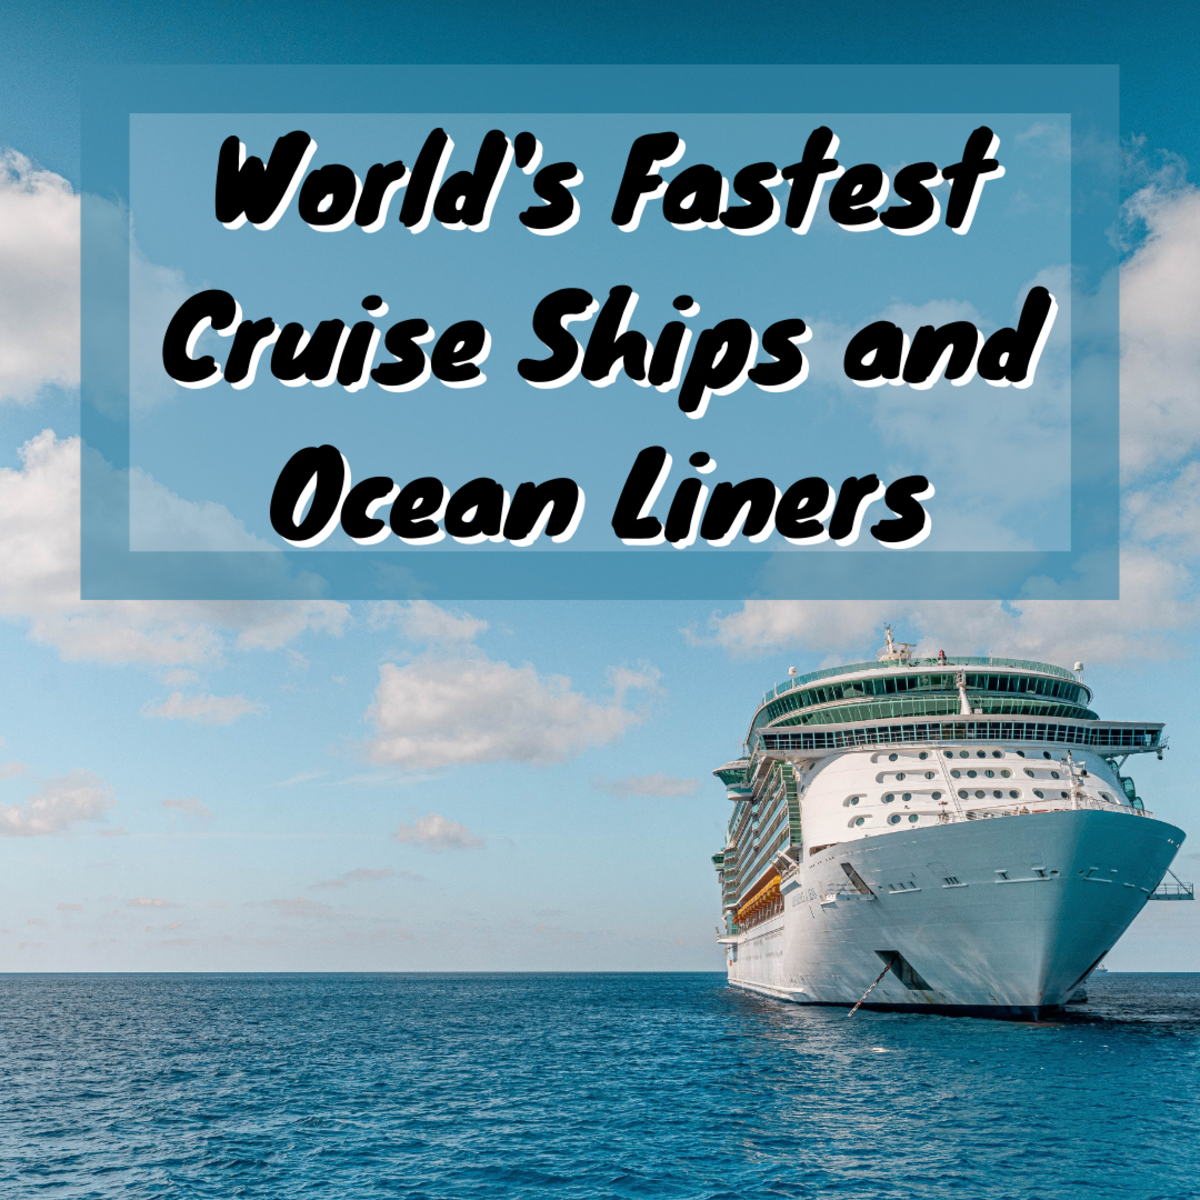 Fastest Cruise Ships and Ocean Liners in the World